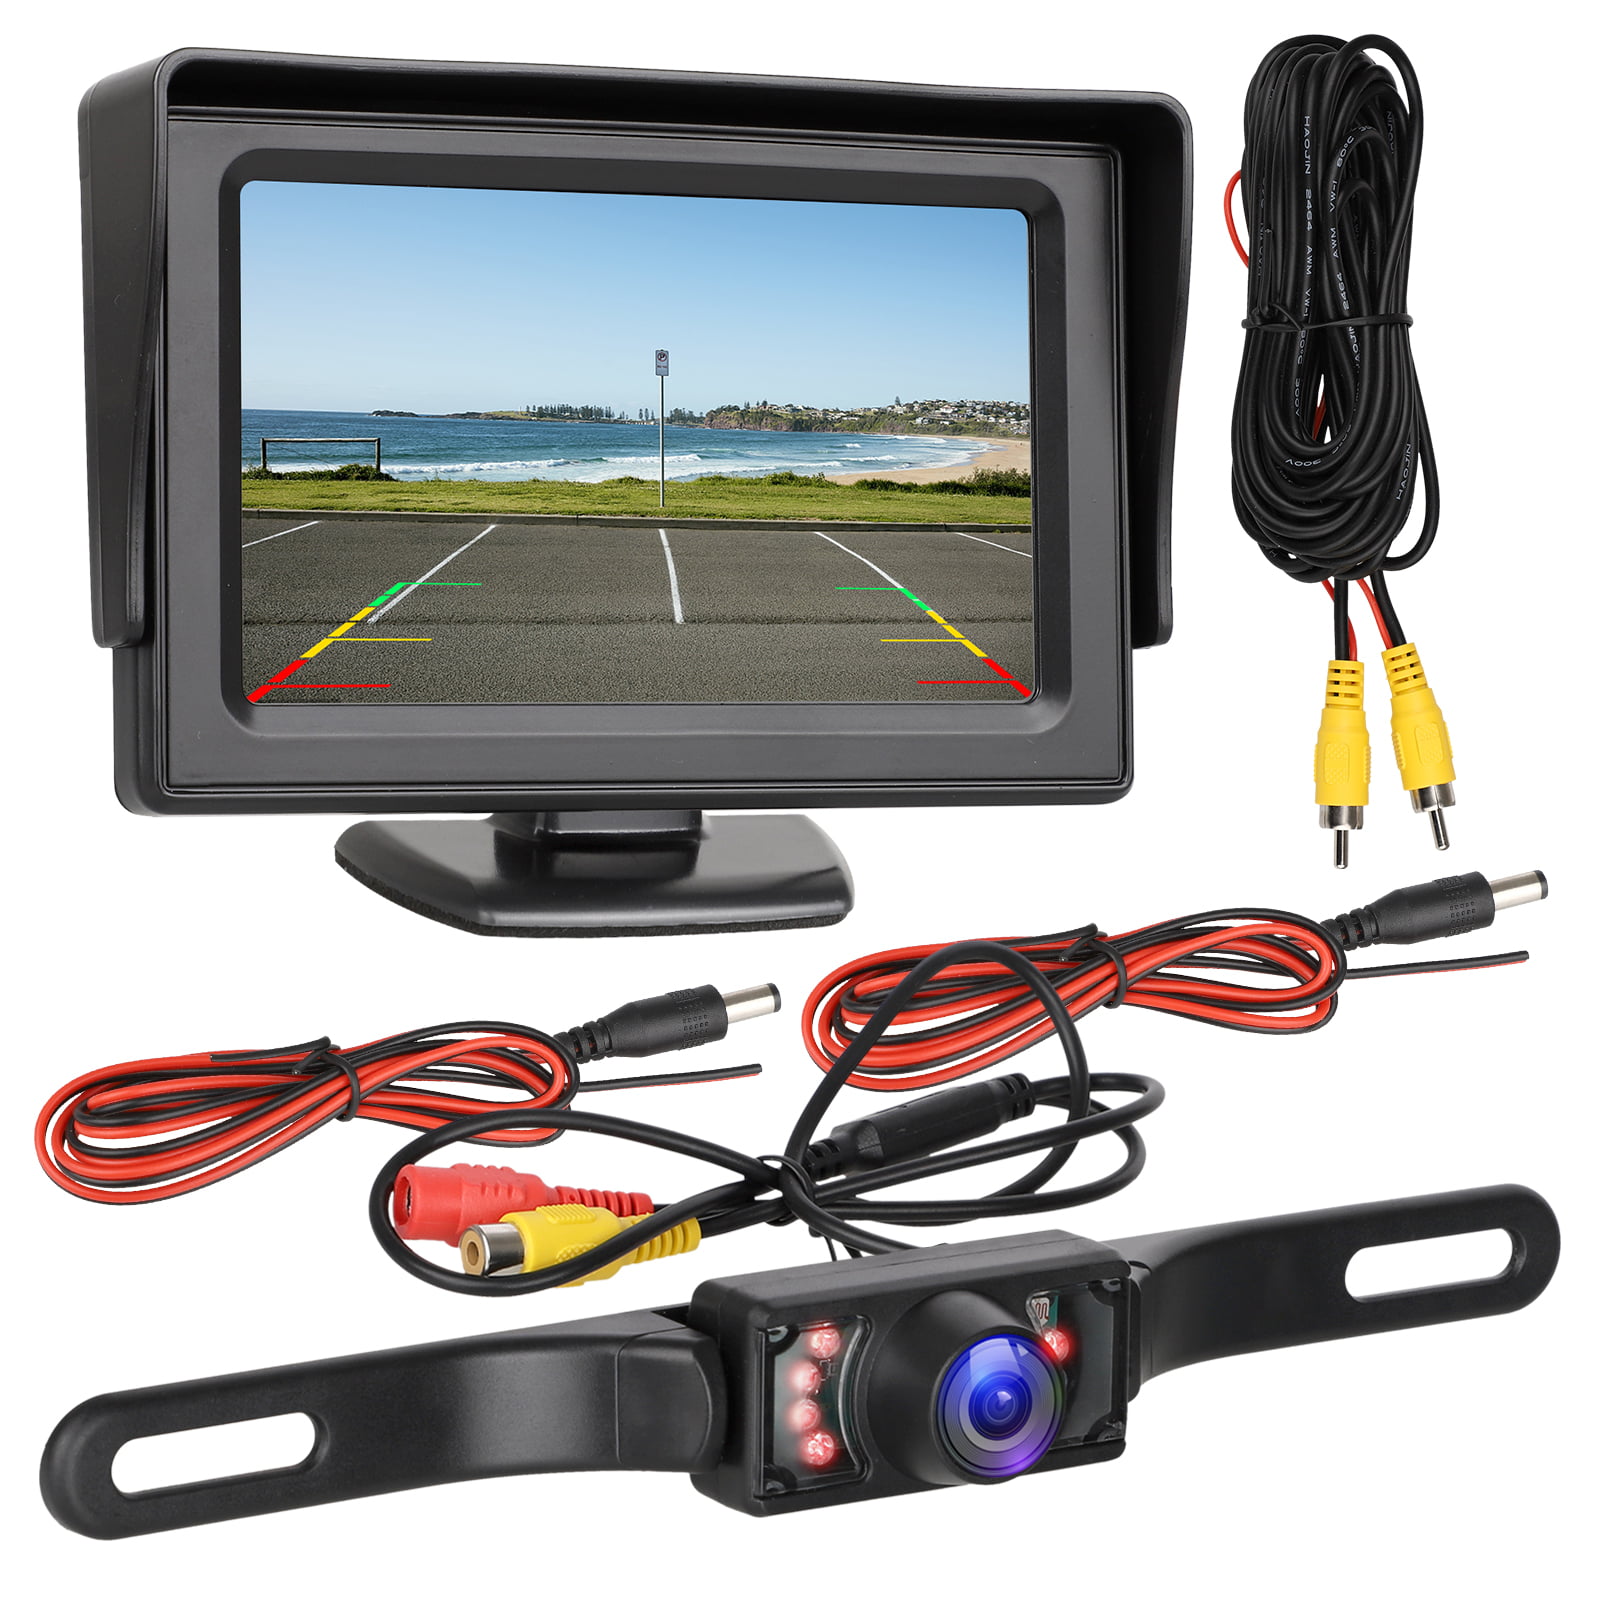 Backup Camera Monitor Kit for car Universal License Plate Reverse Waterproof Night Vision Rearview HD Reversing Camera+4.3 inch LCD Rearview Monitor DALLUX RCS4302 